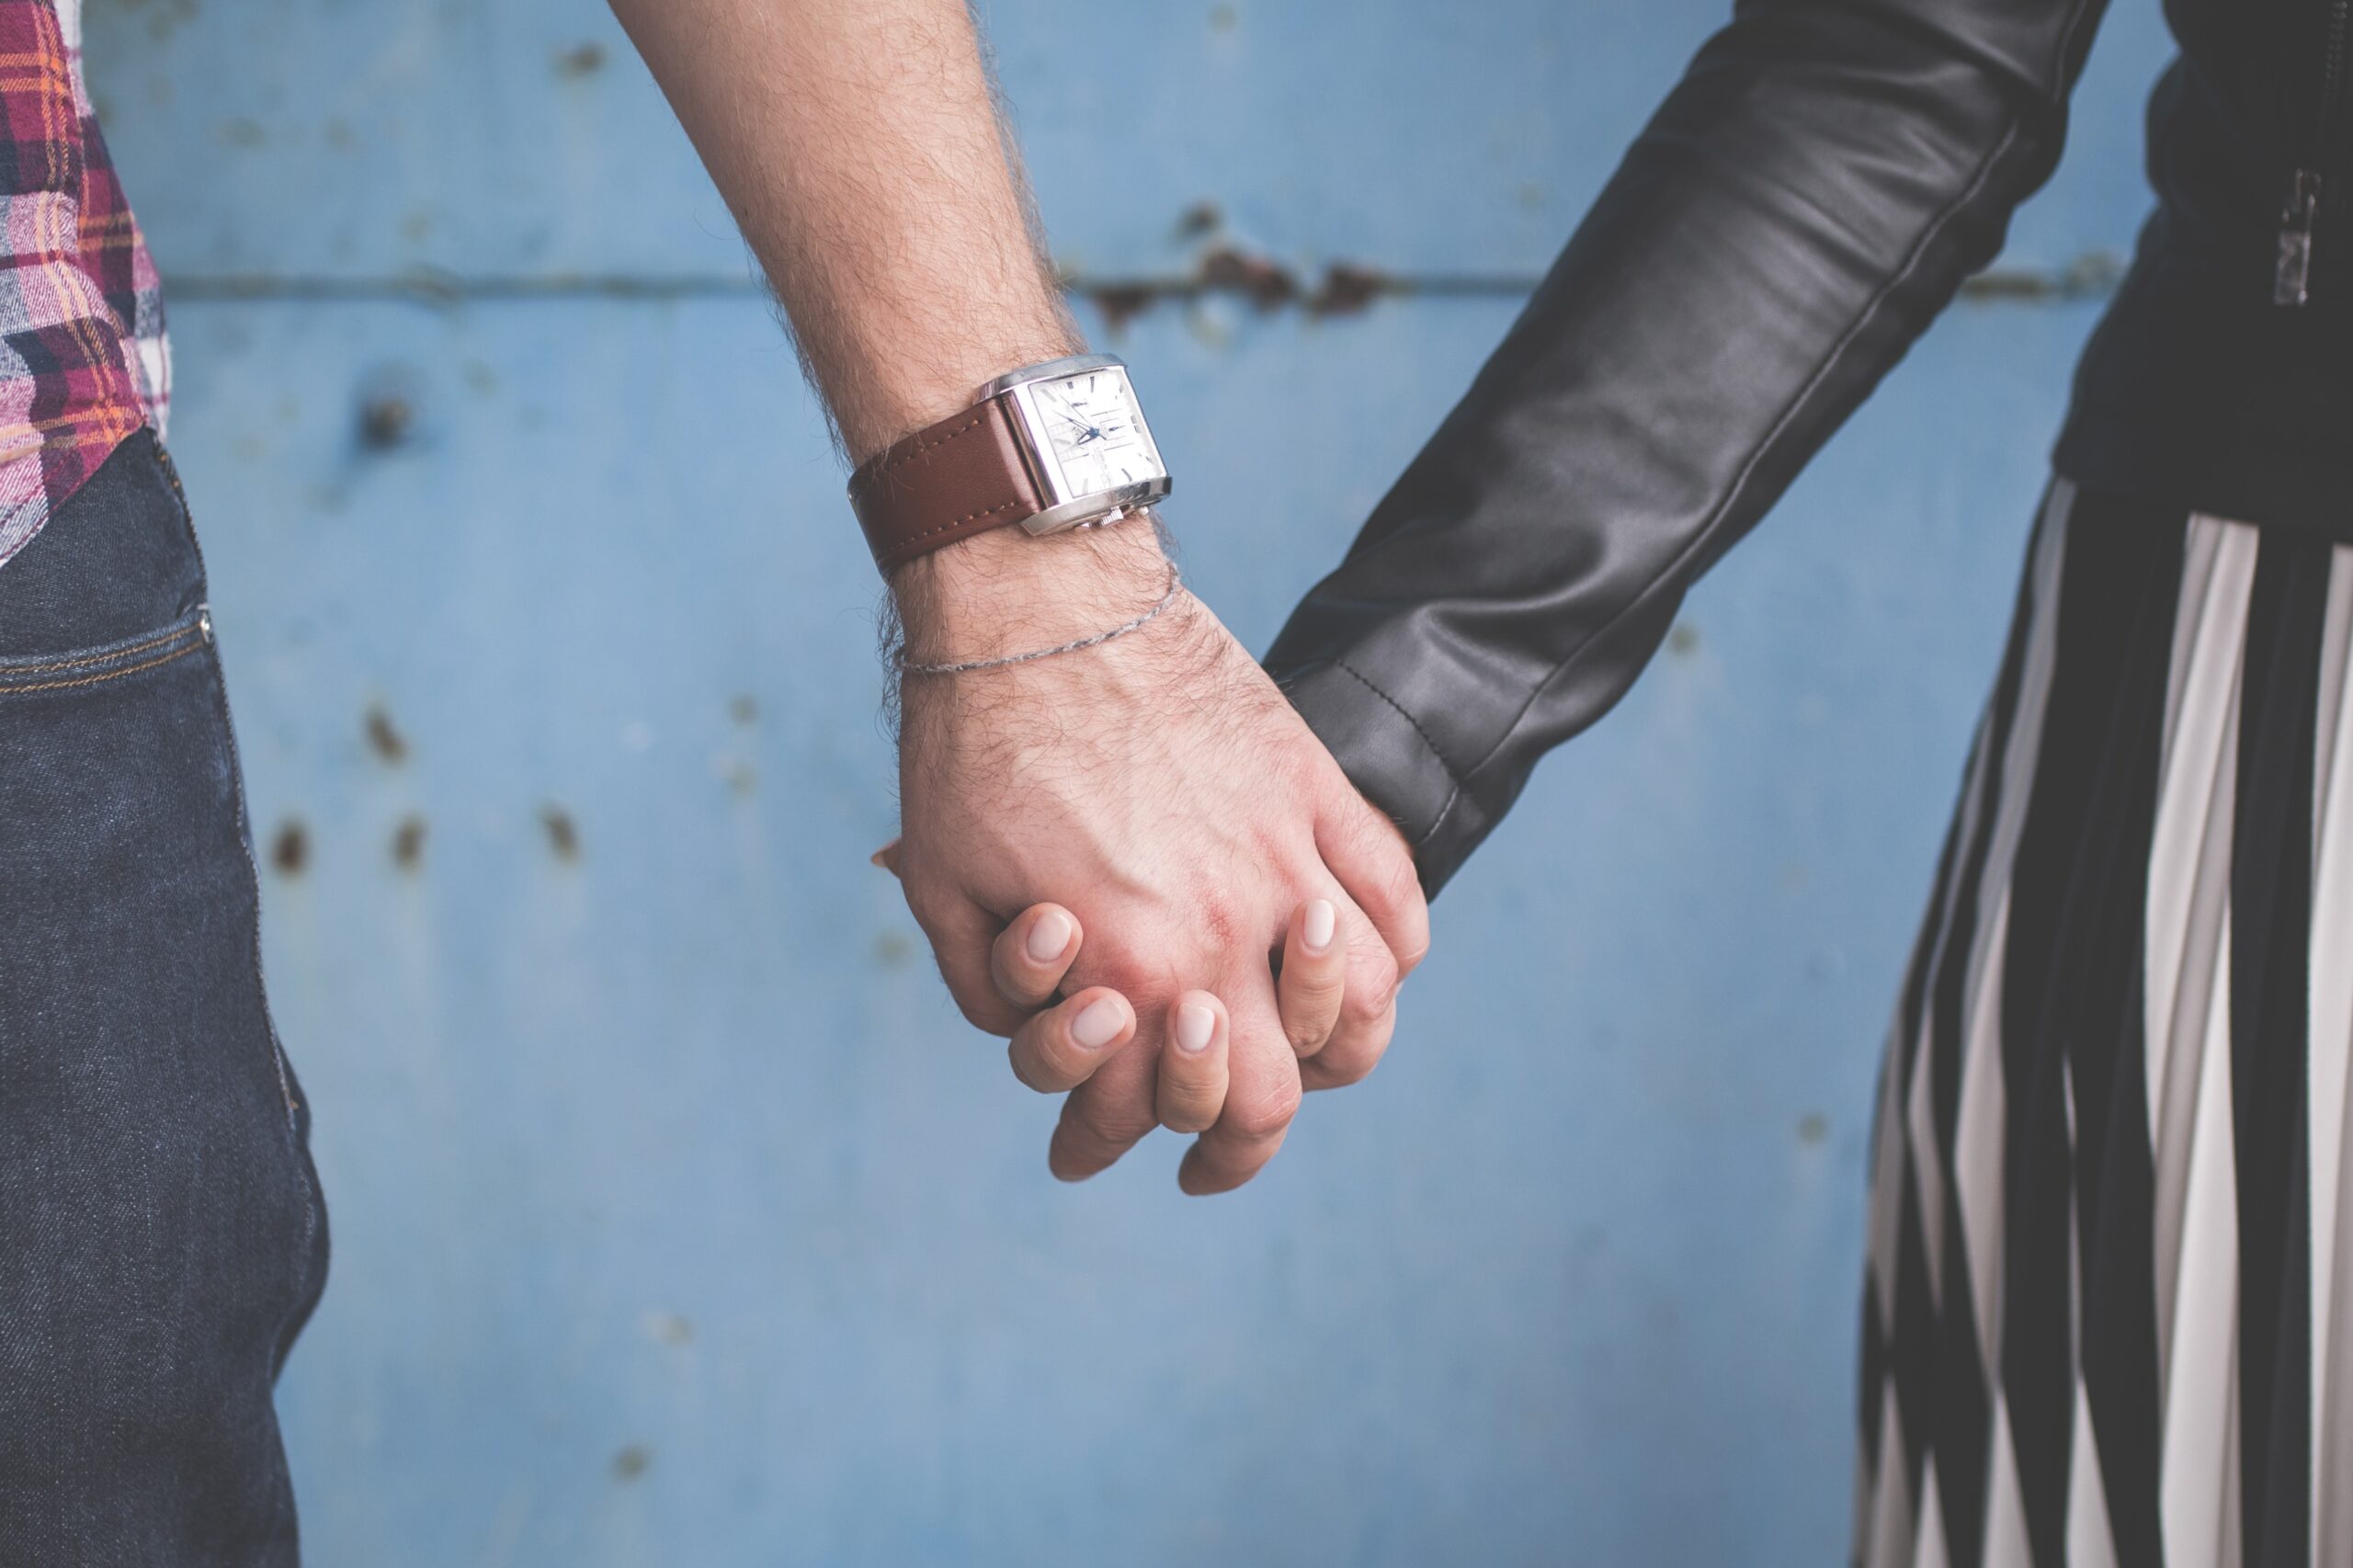 A person with social anxiety never been in a relationship underscore the profound impact of anxiety on their ability to connect with others romantically.